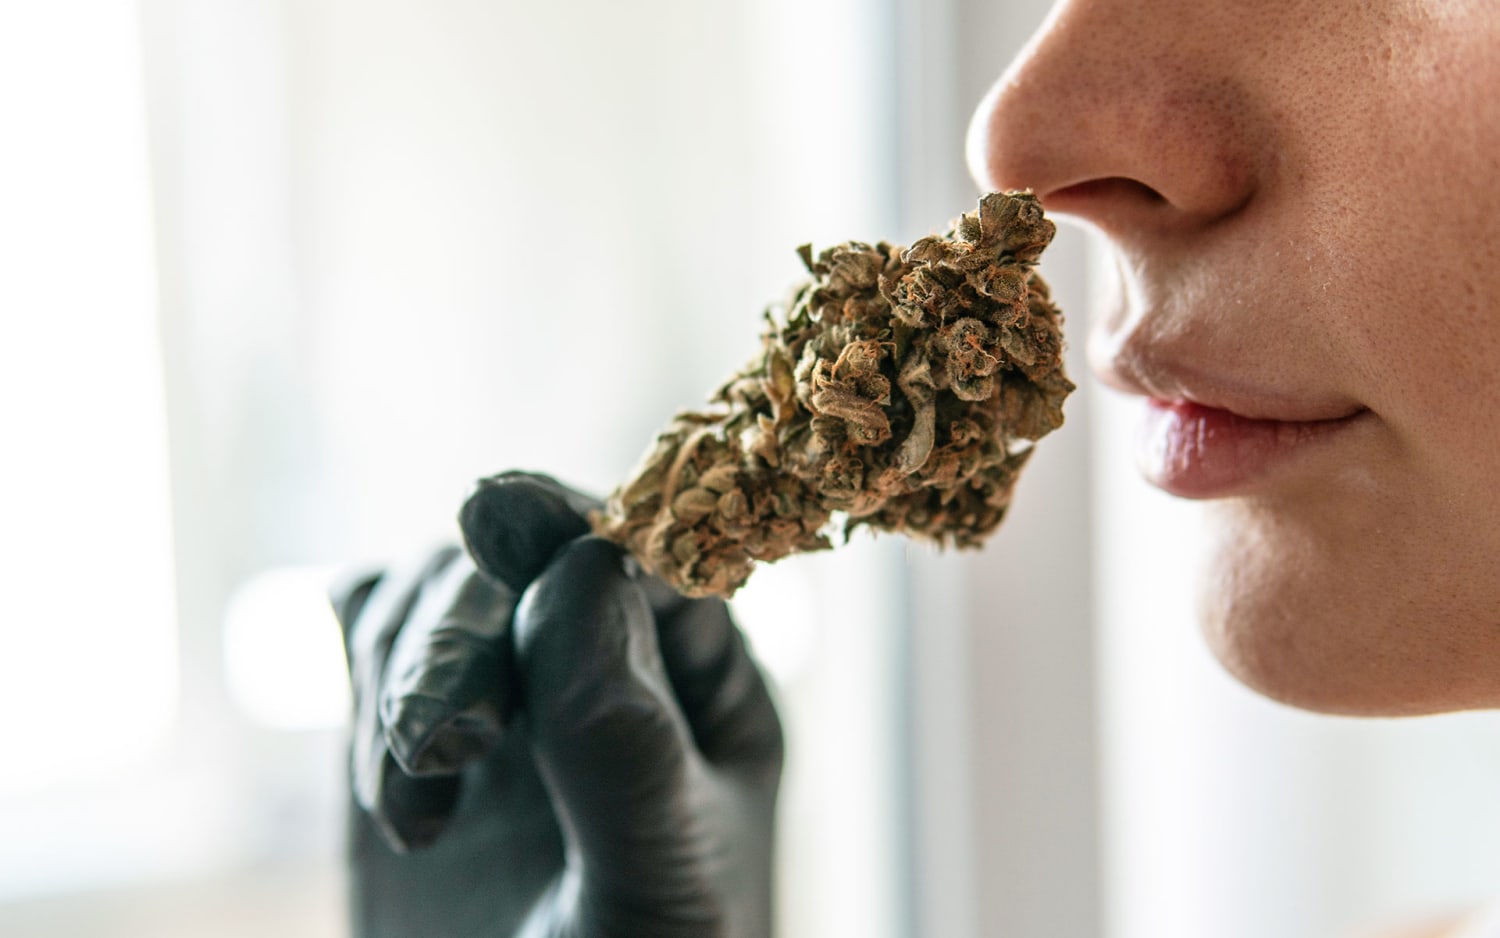 Opinion: Let us smell the legal cannabis for sale, dammit!